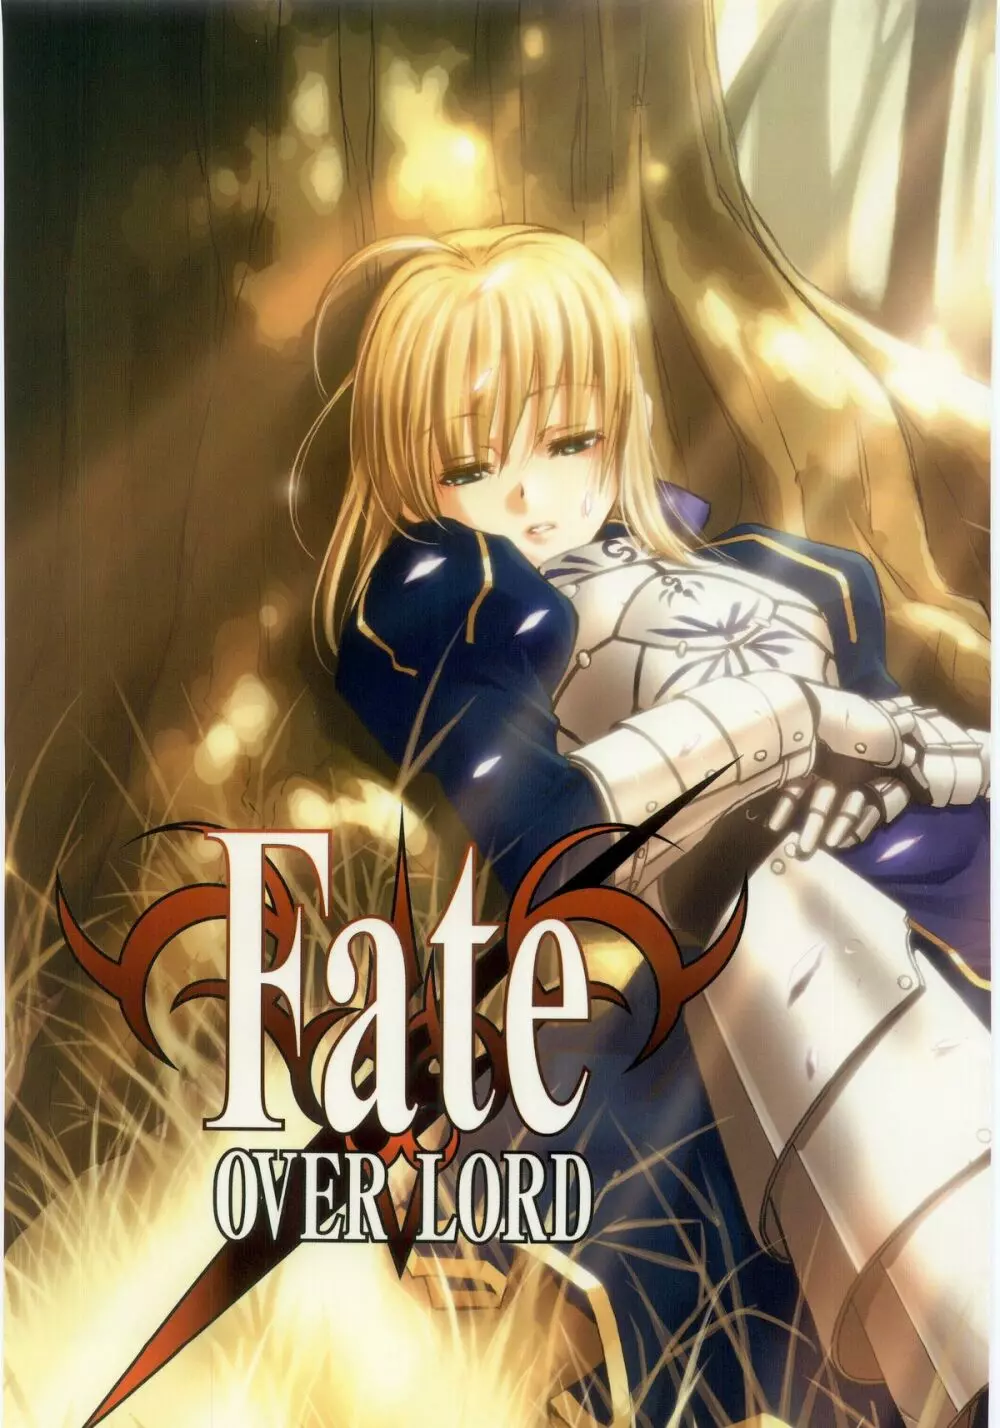 Fate/Over lord